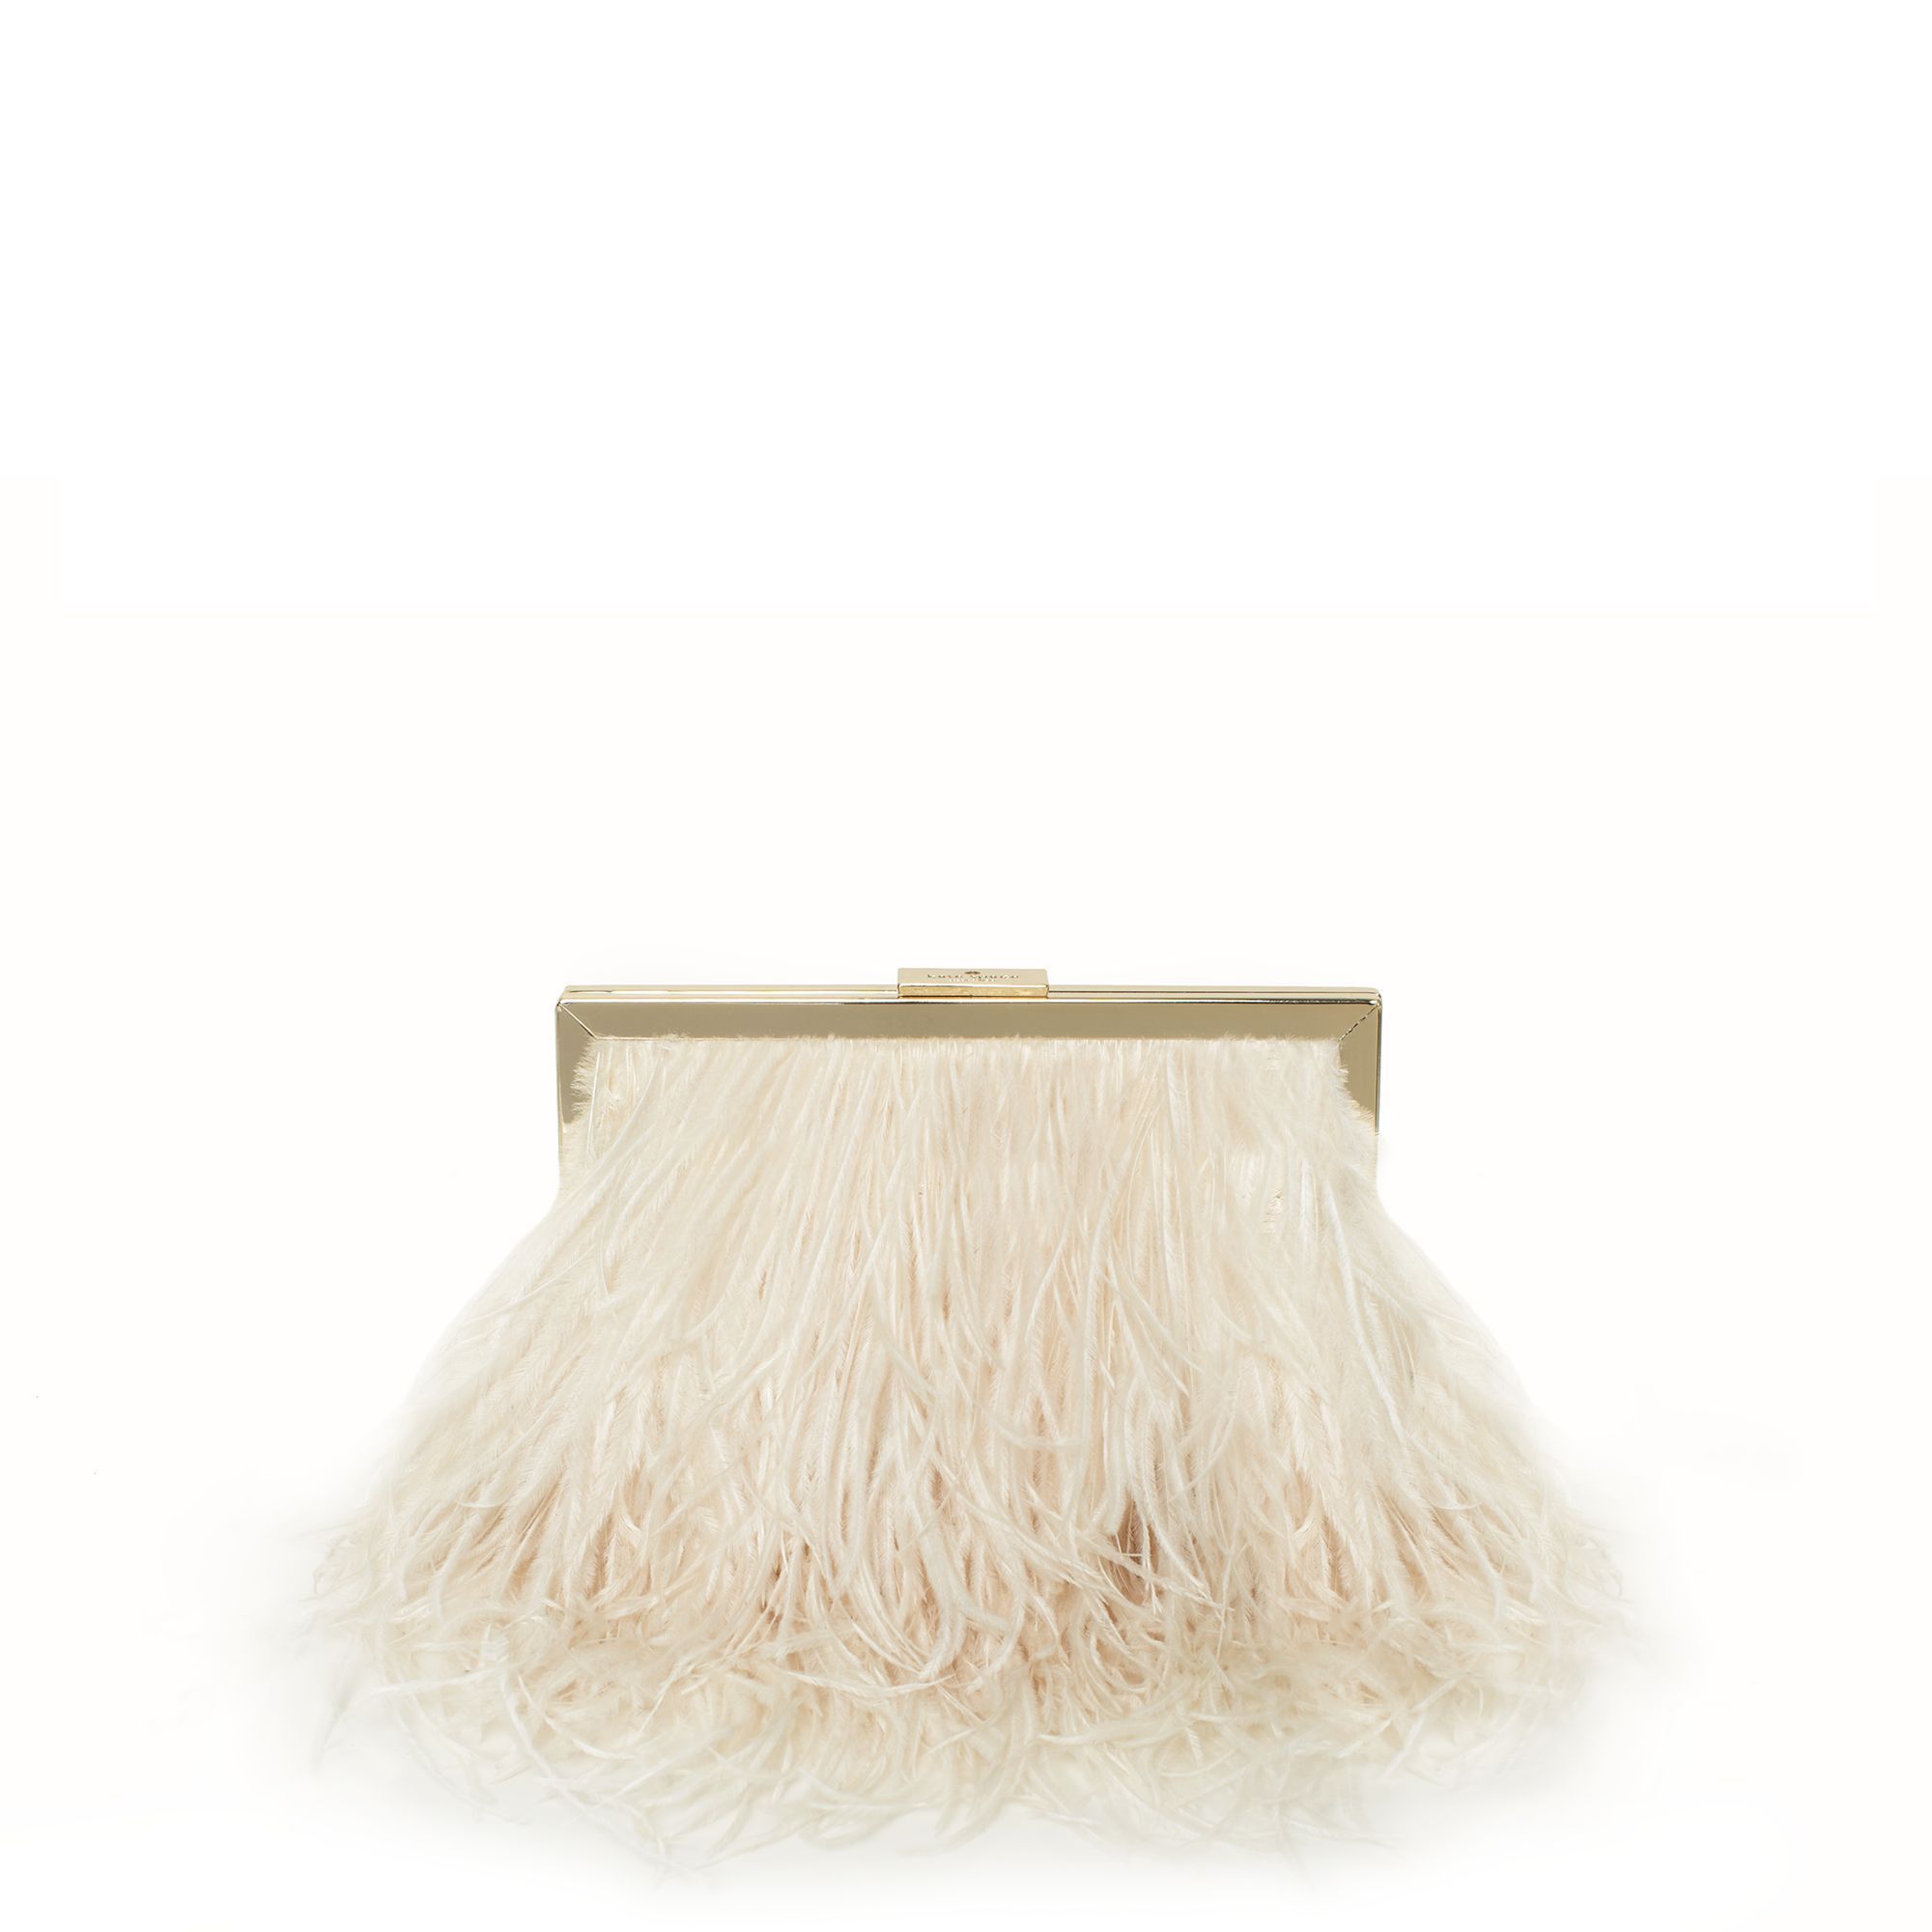 faux ostrich feather #wedding bag i'd carry everyday